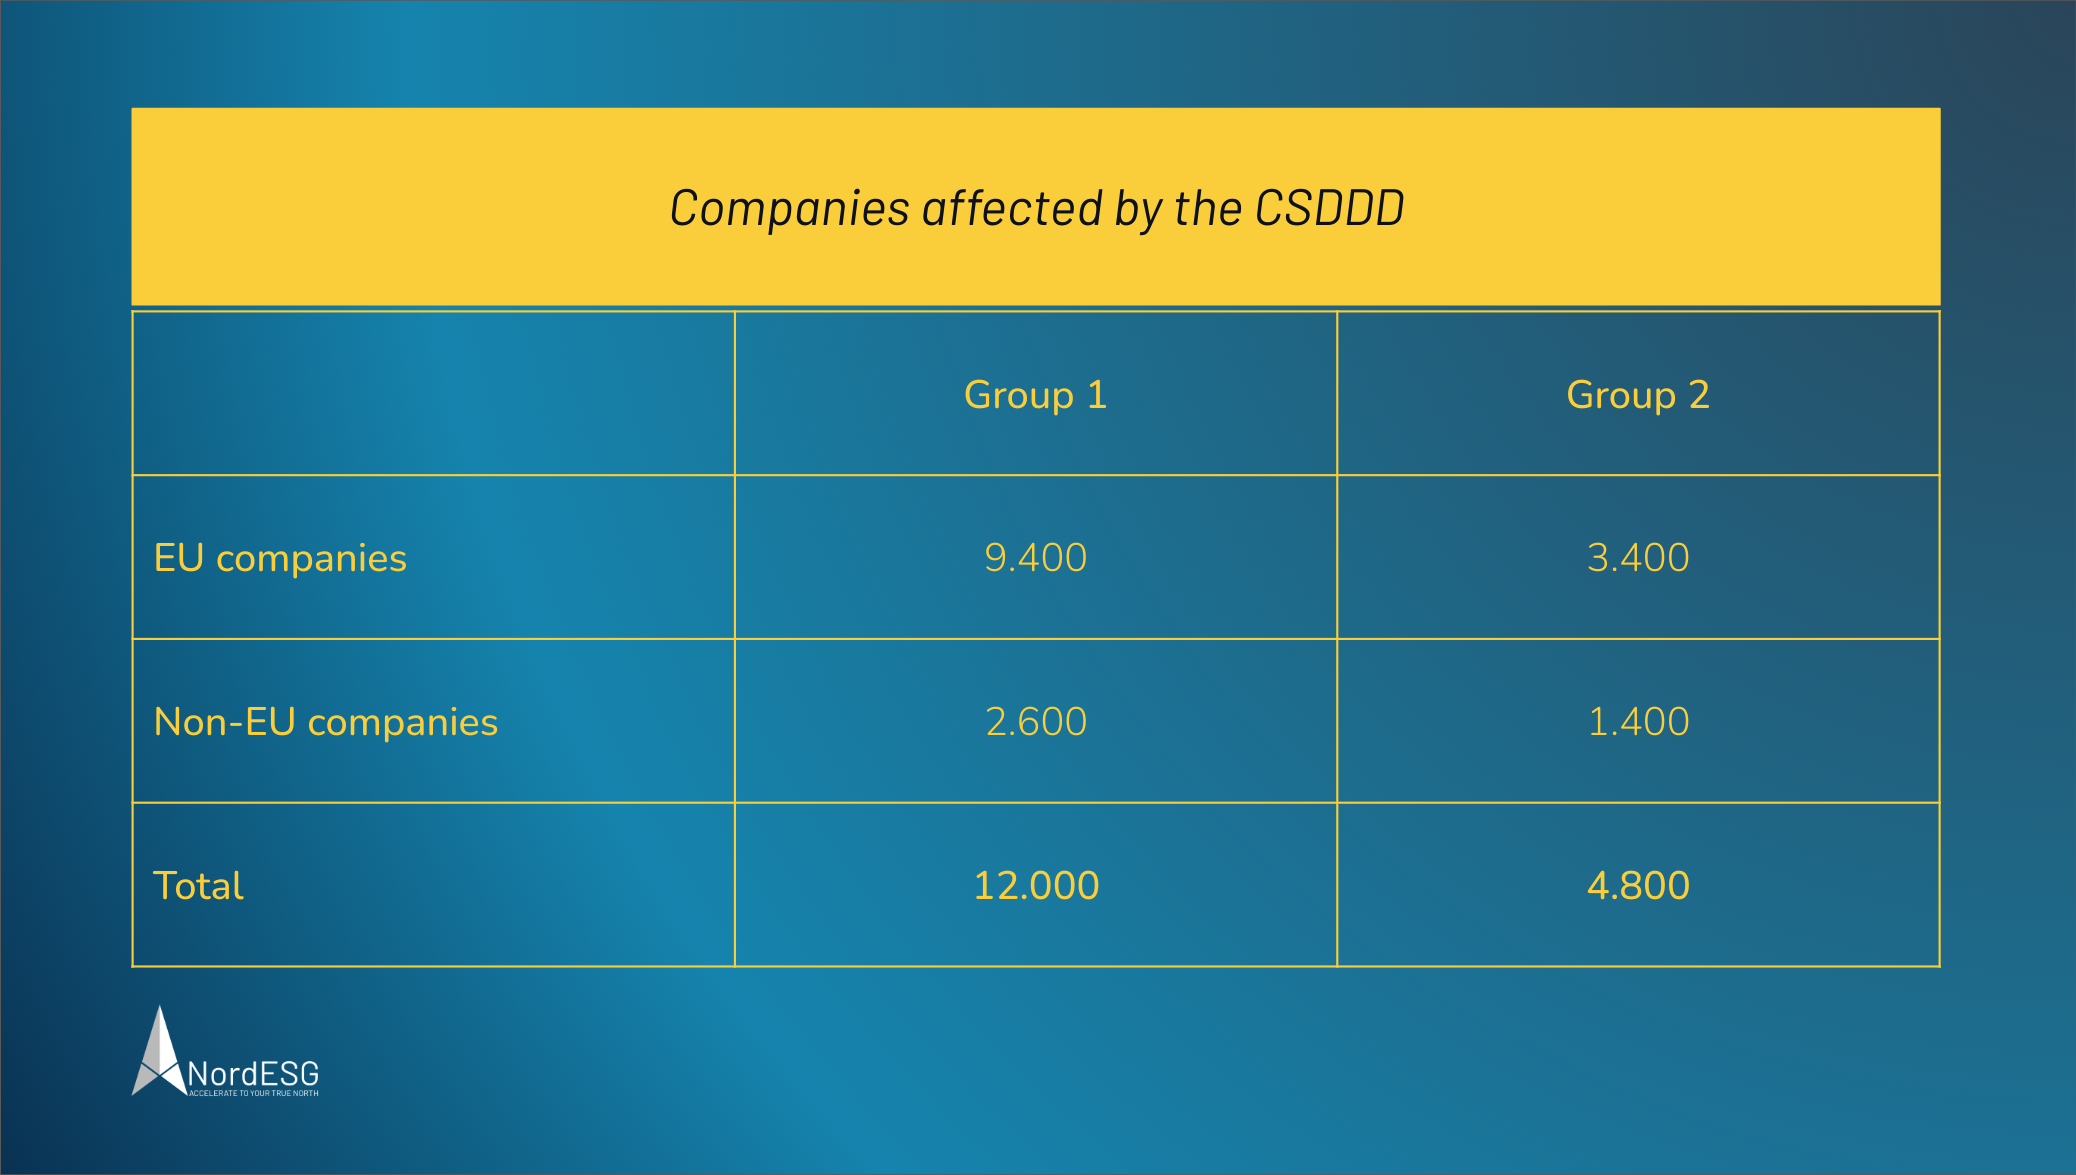 Companies affected by the CSDDD Corporate Sustainability Due Diligence Directive